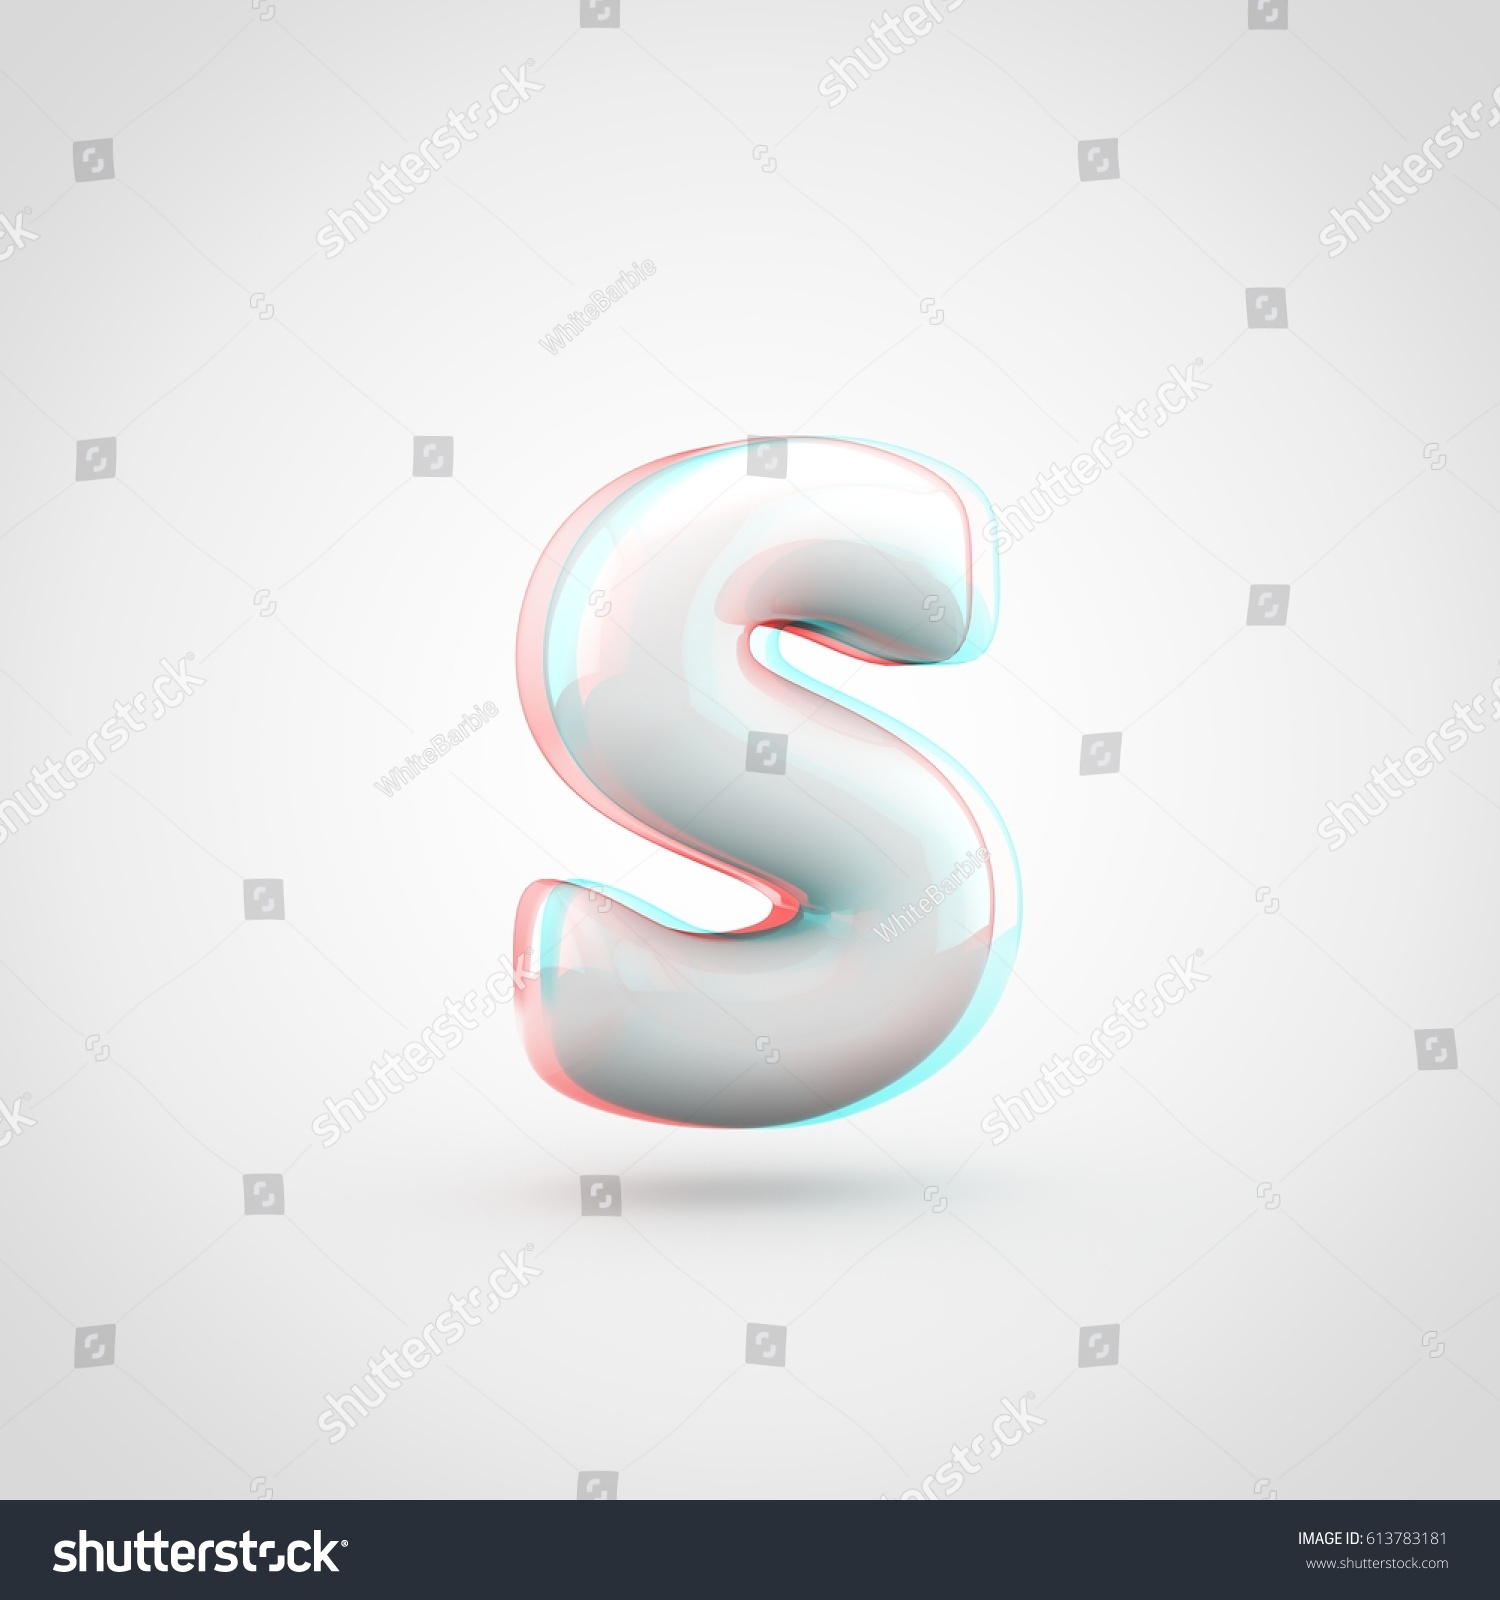 Stereoscopic Glossy White Letter S Lowercase 3d Render Of Bubble